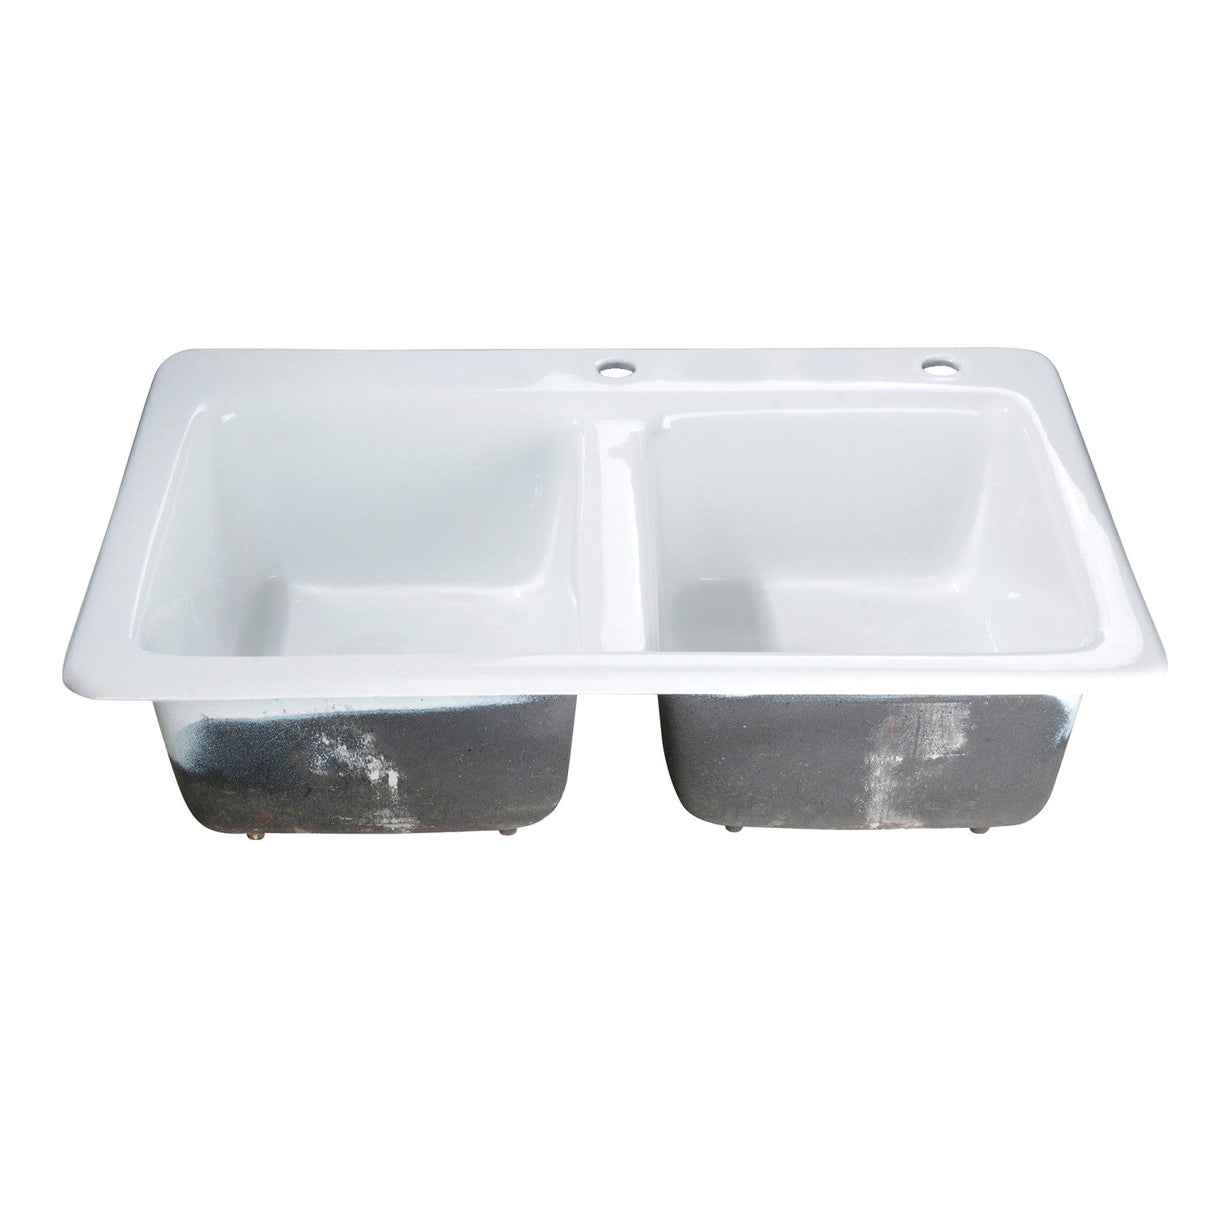 Petra Galley GT33229D2 33-Inch Cast Iron Self-Rimming 2-Hole Double Bowl Drop-In Kitchen Sink, White